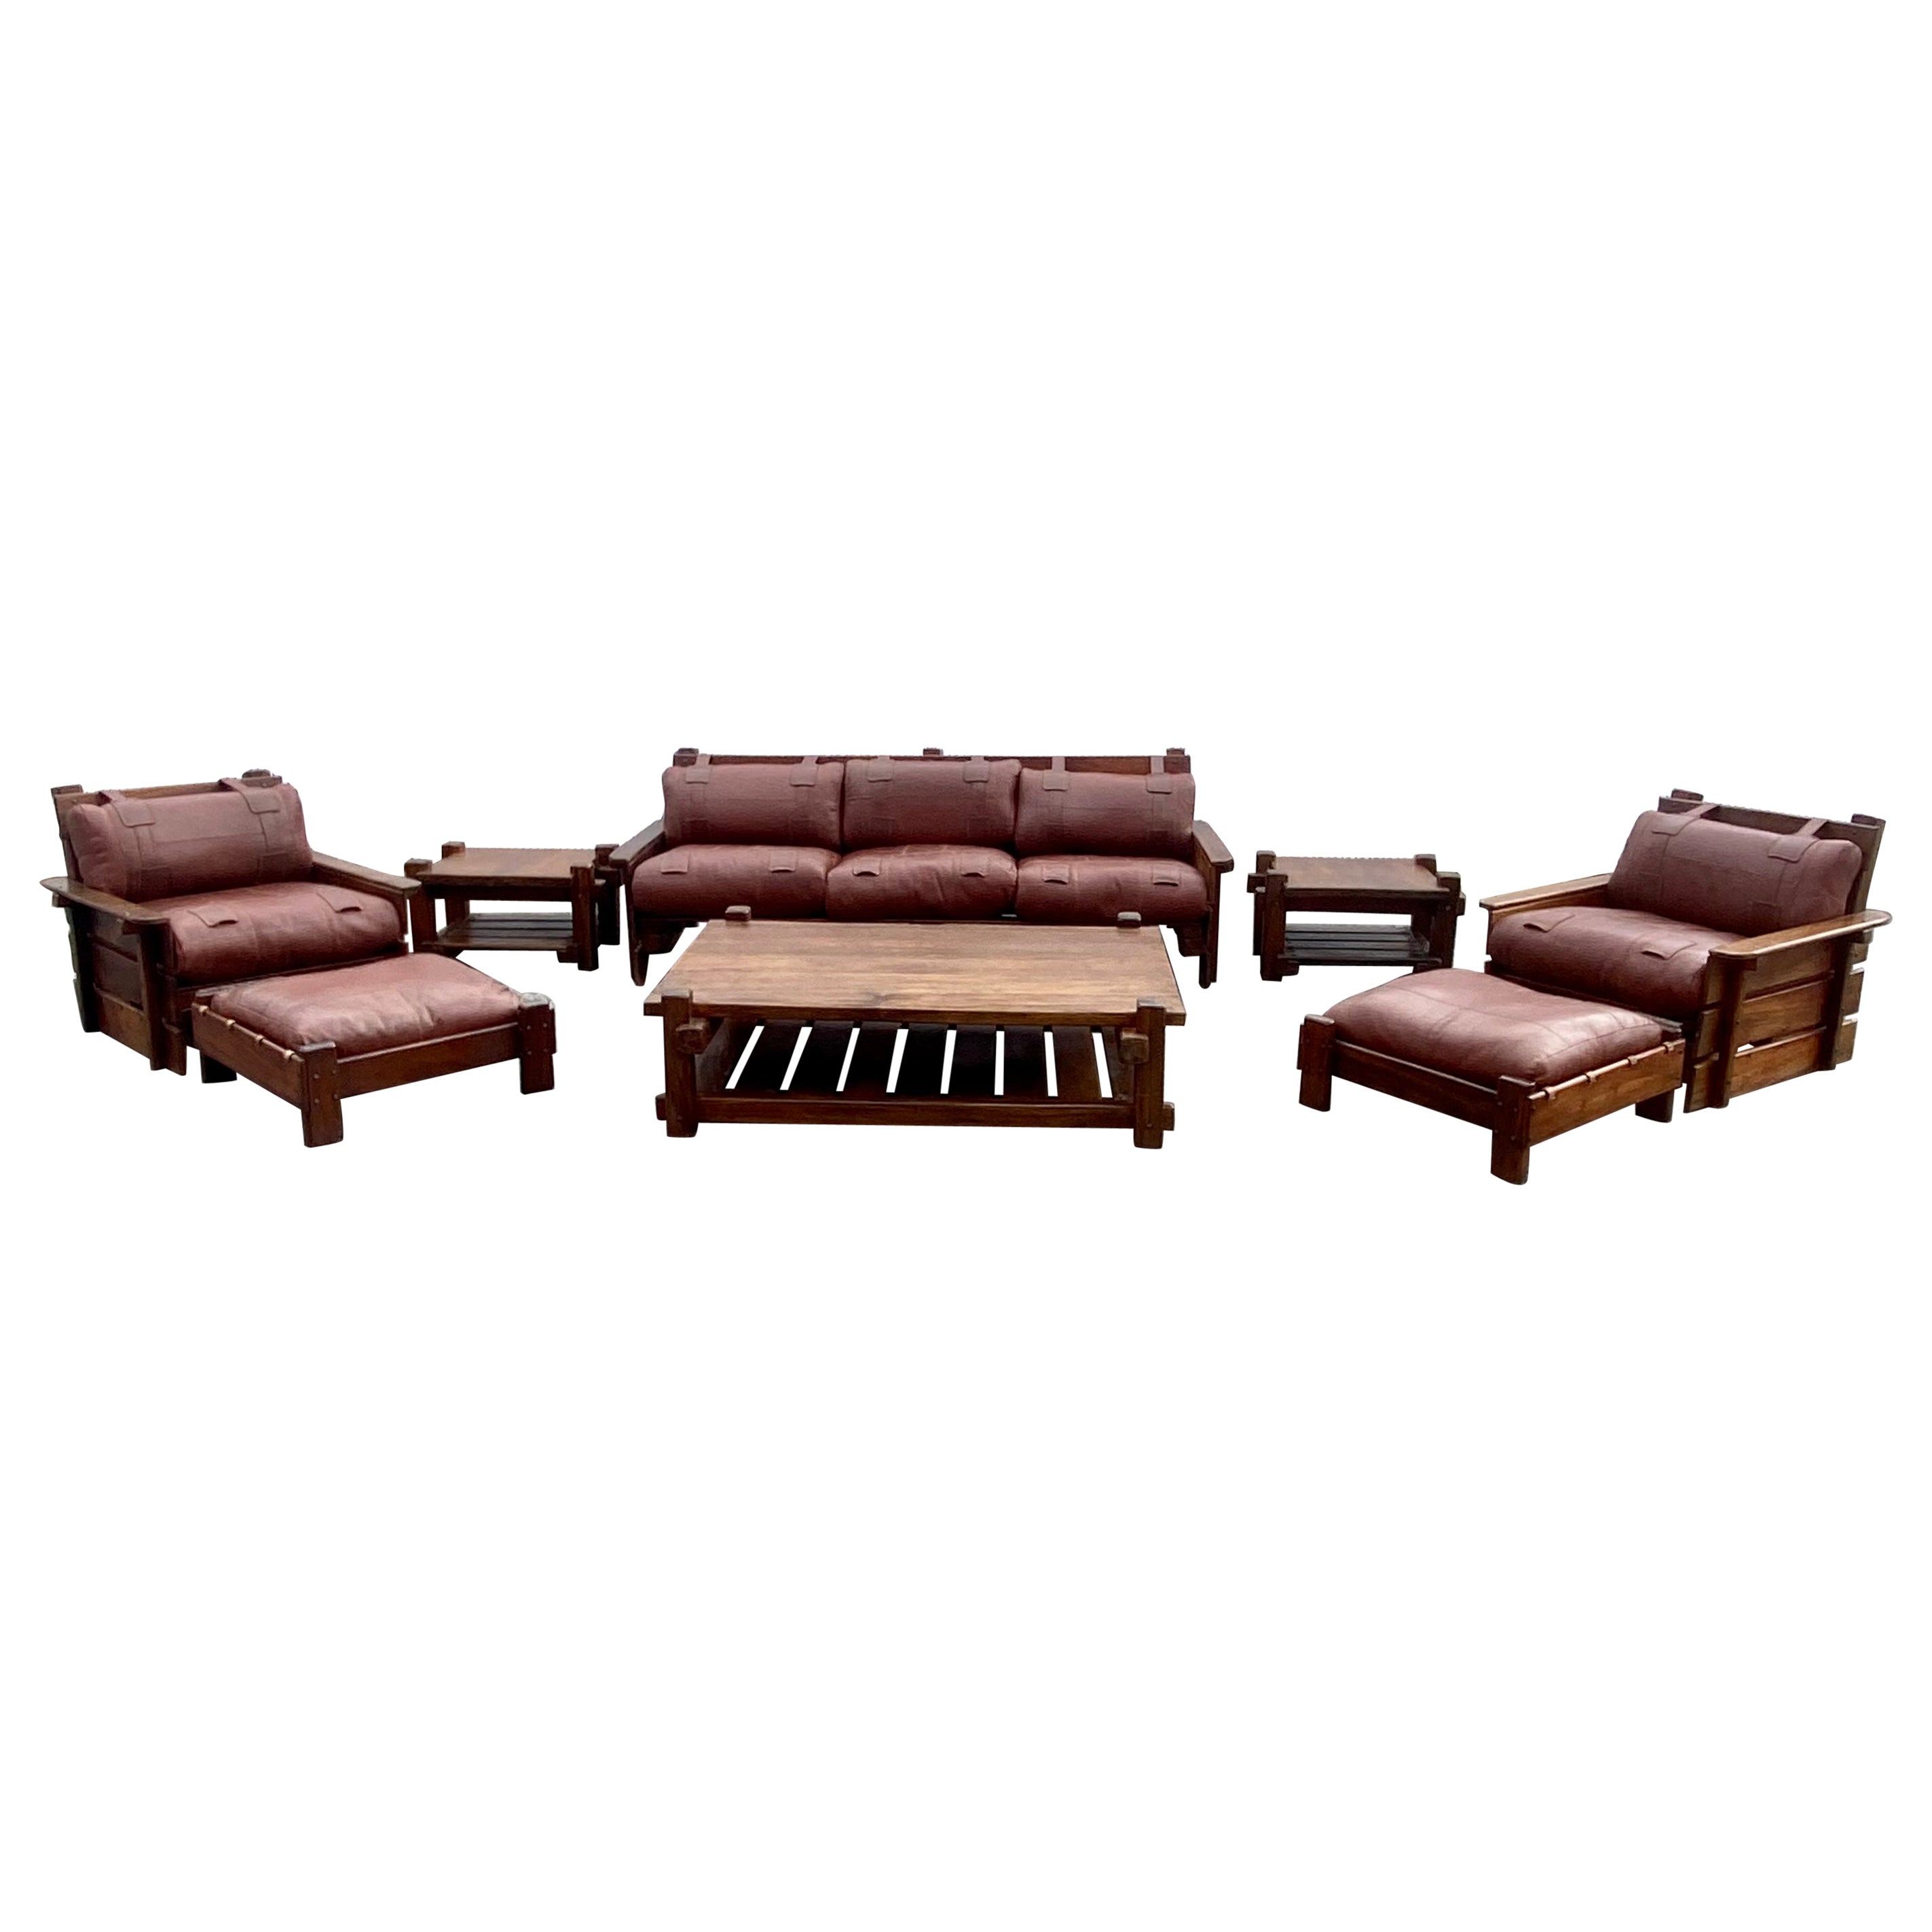 1930s Rustic Pine Saddle Leather Sling Living Room Suite, Set of 8